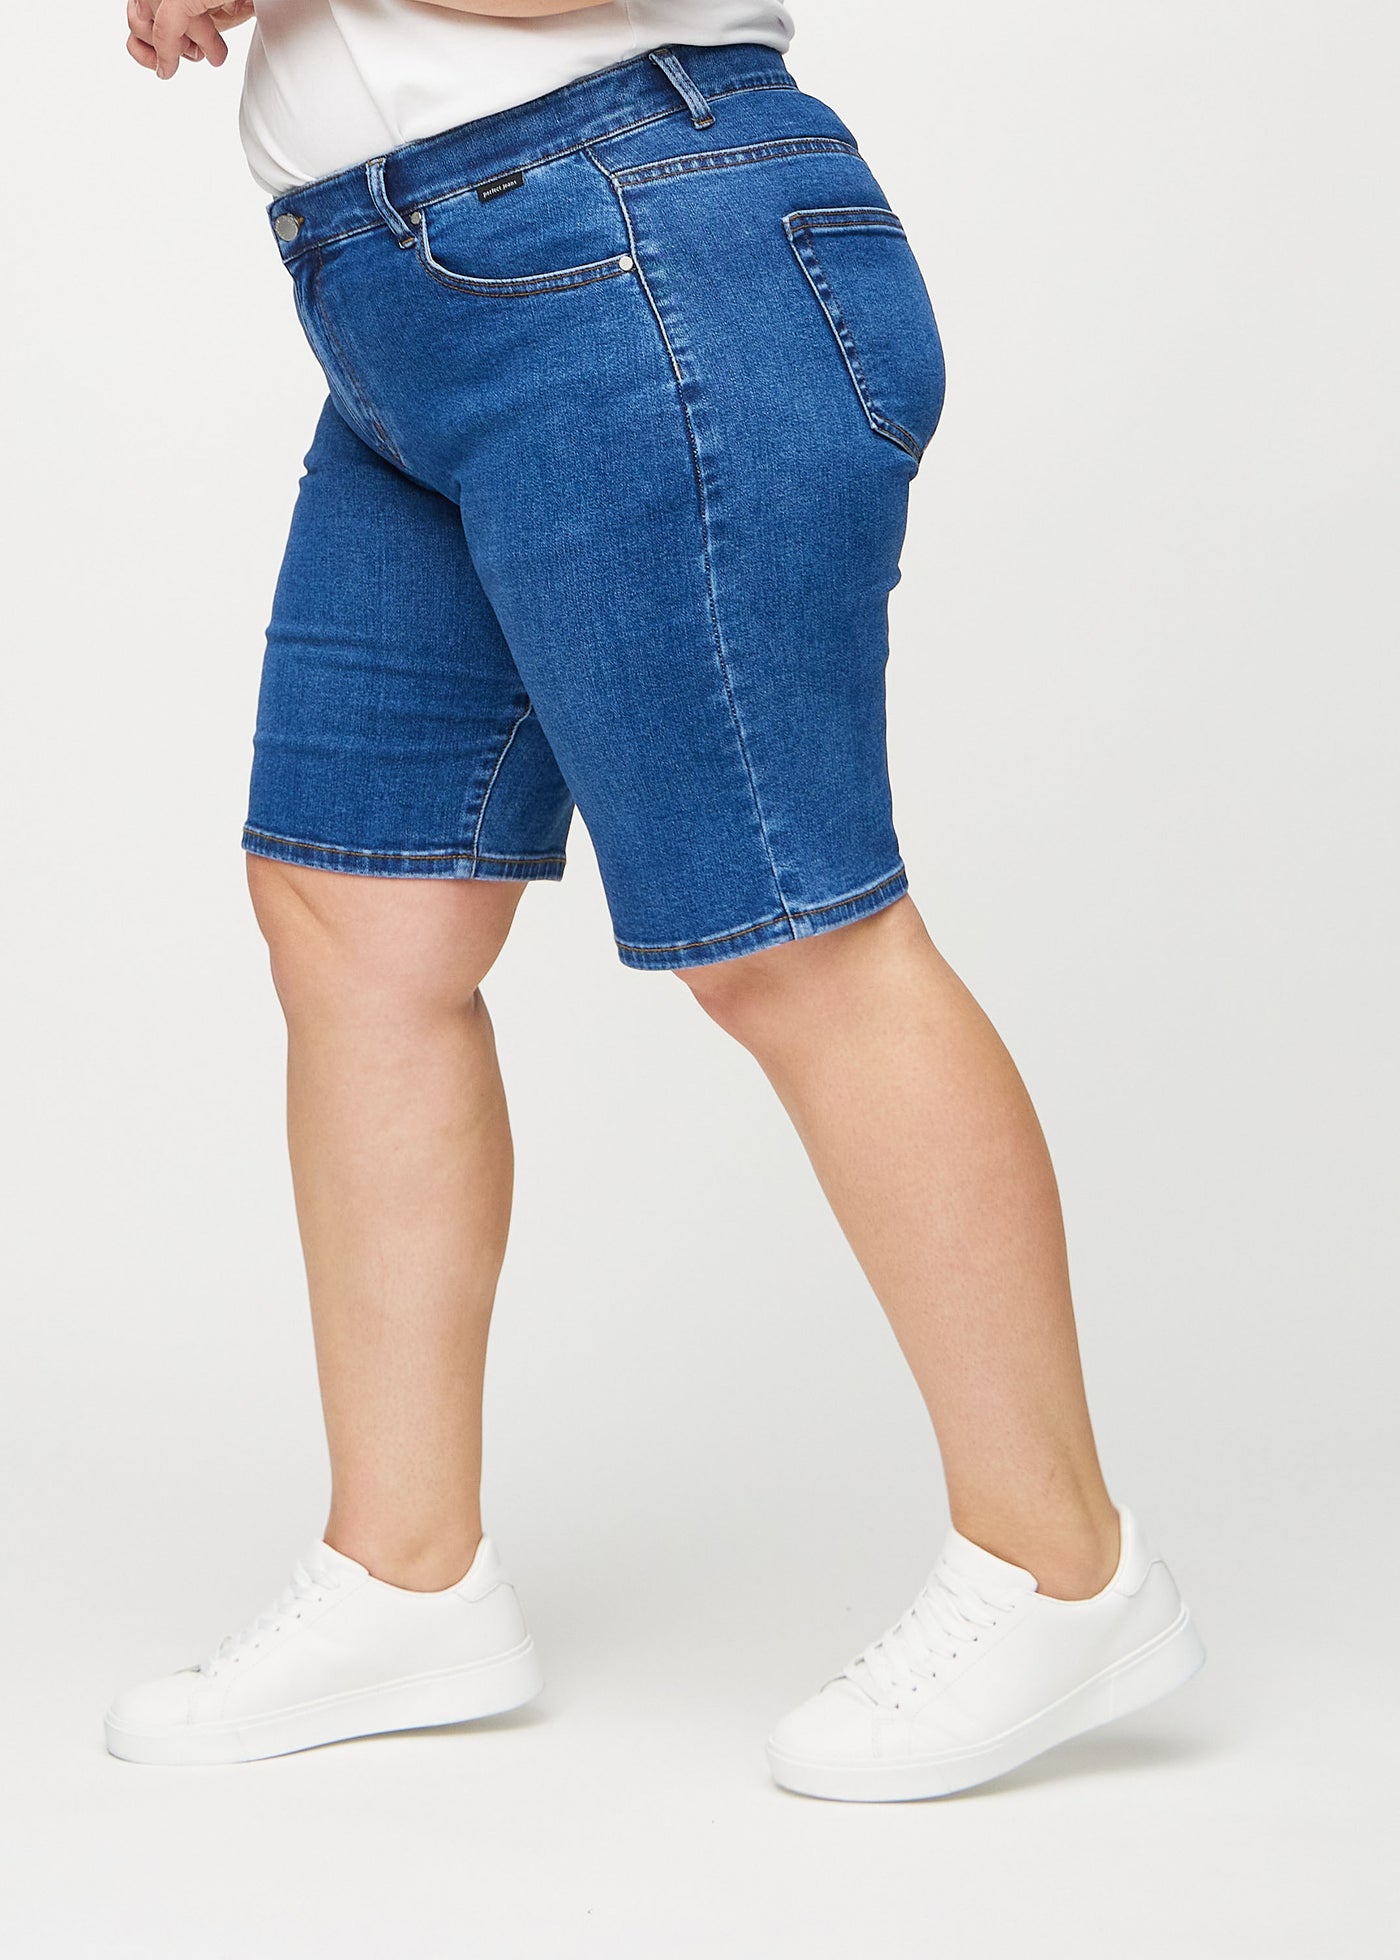 Perfect Shorts - Middle - Regular - Oceans™